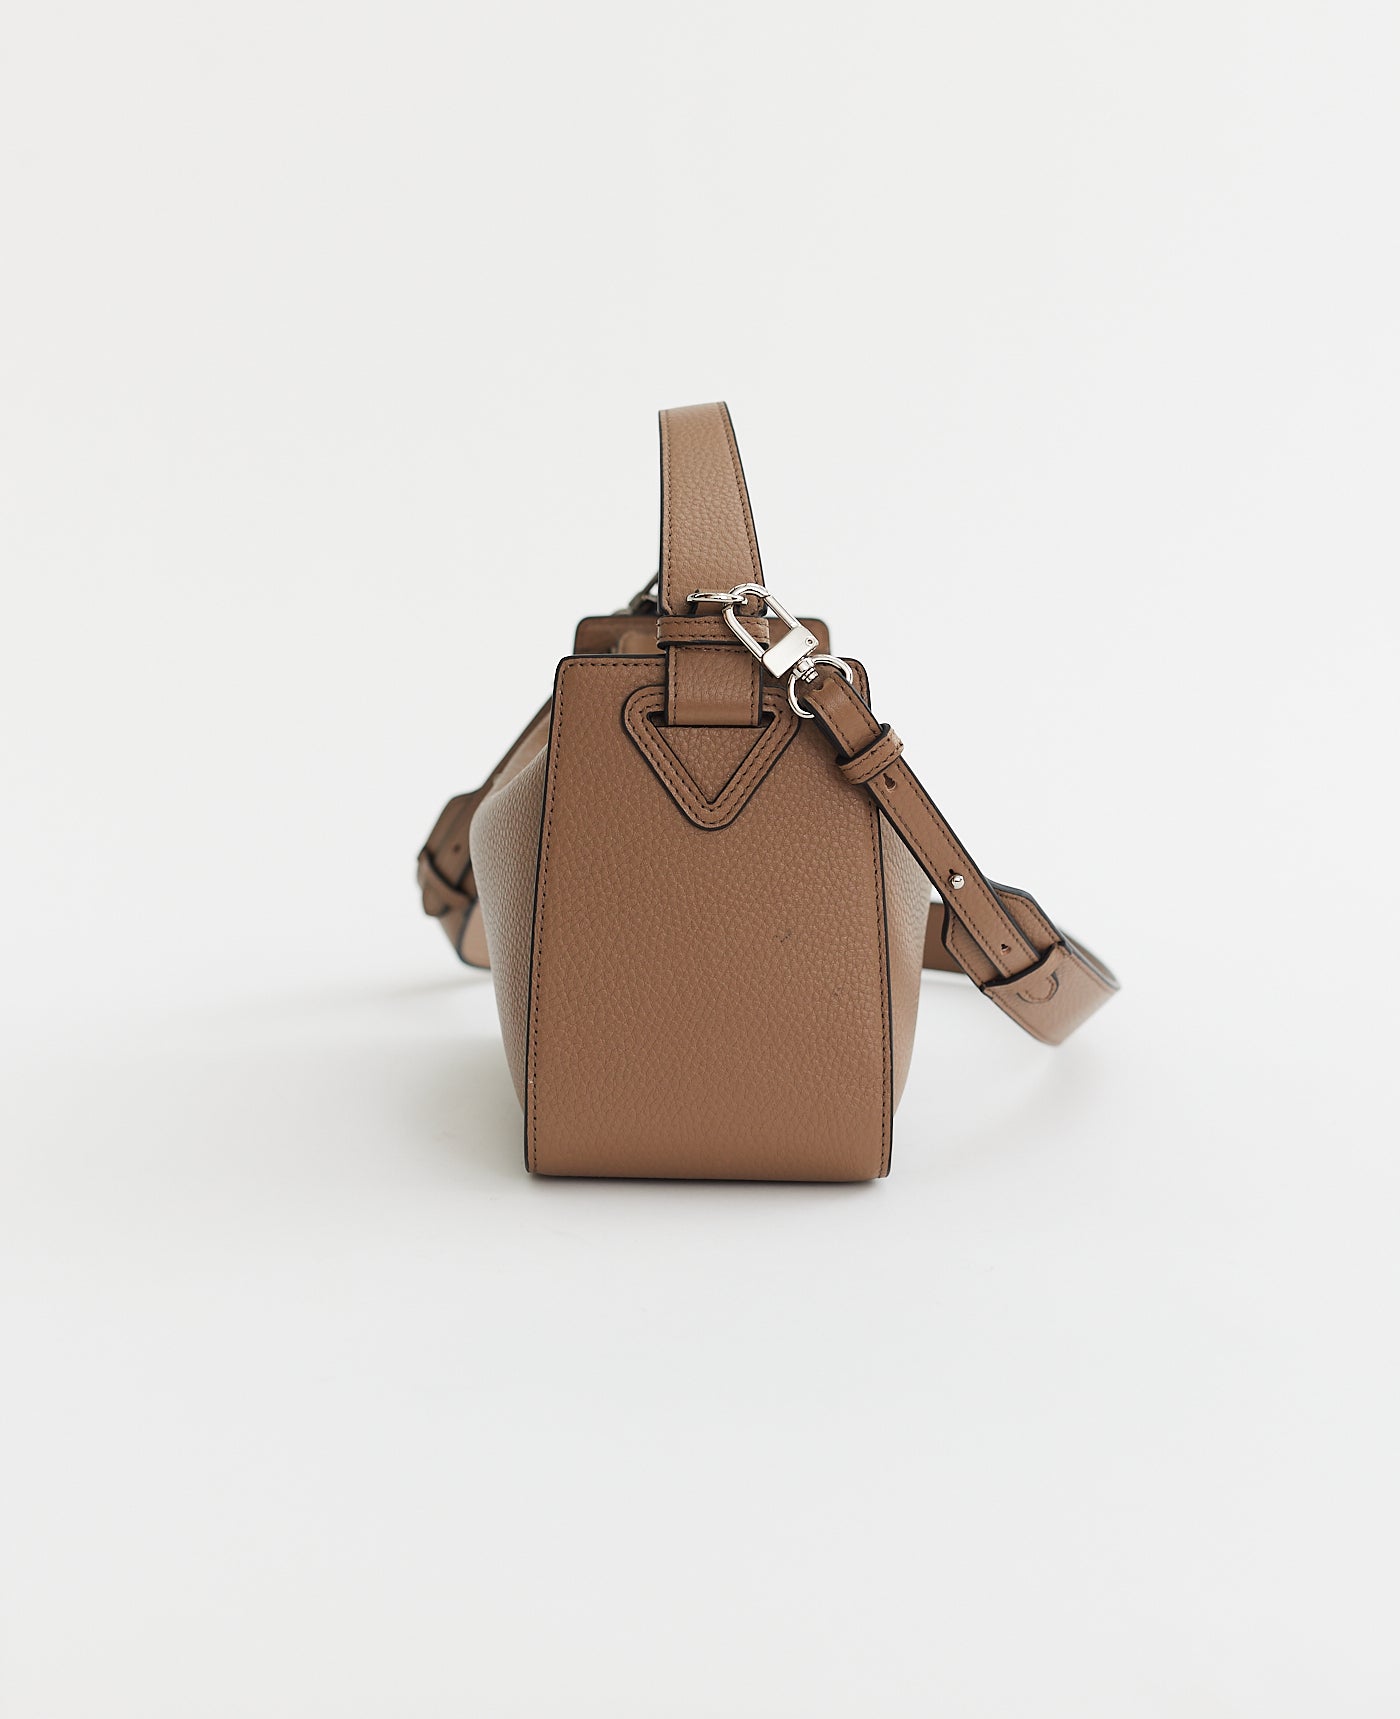 Clementine Bag: Taupe Pebbled Leather